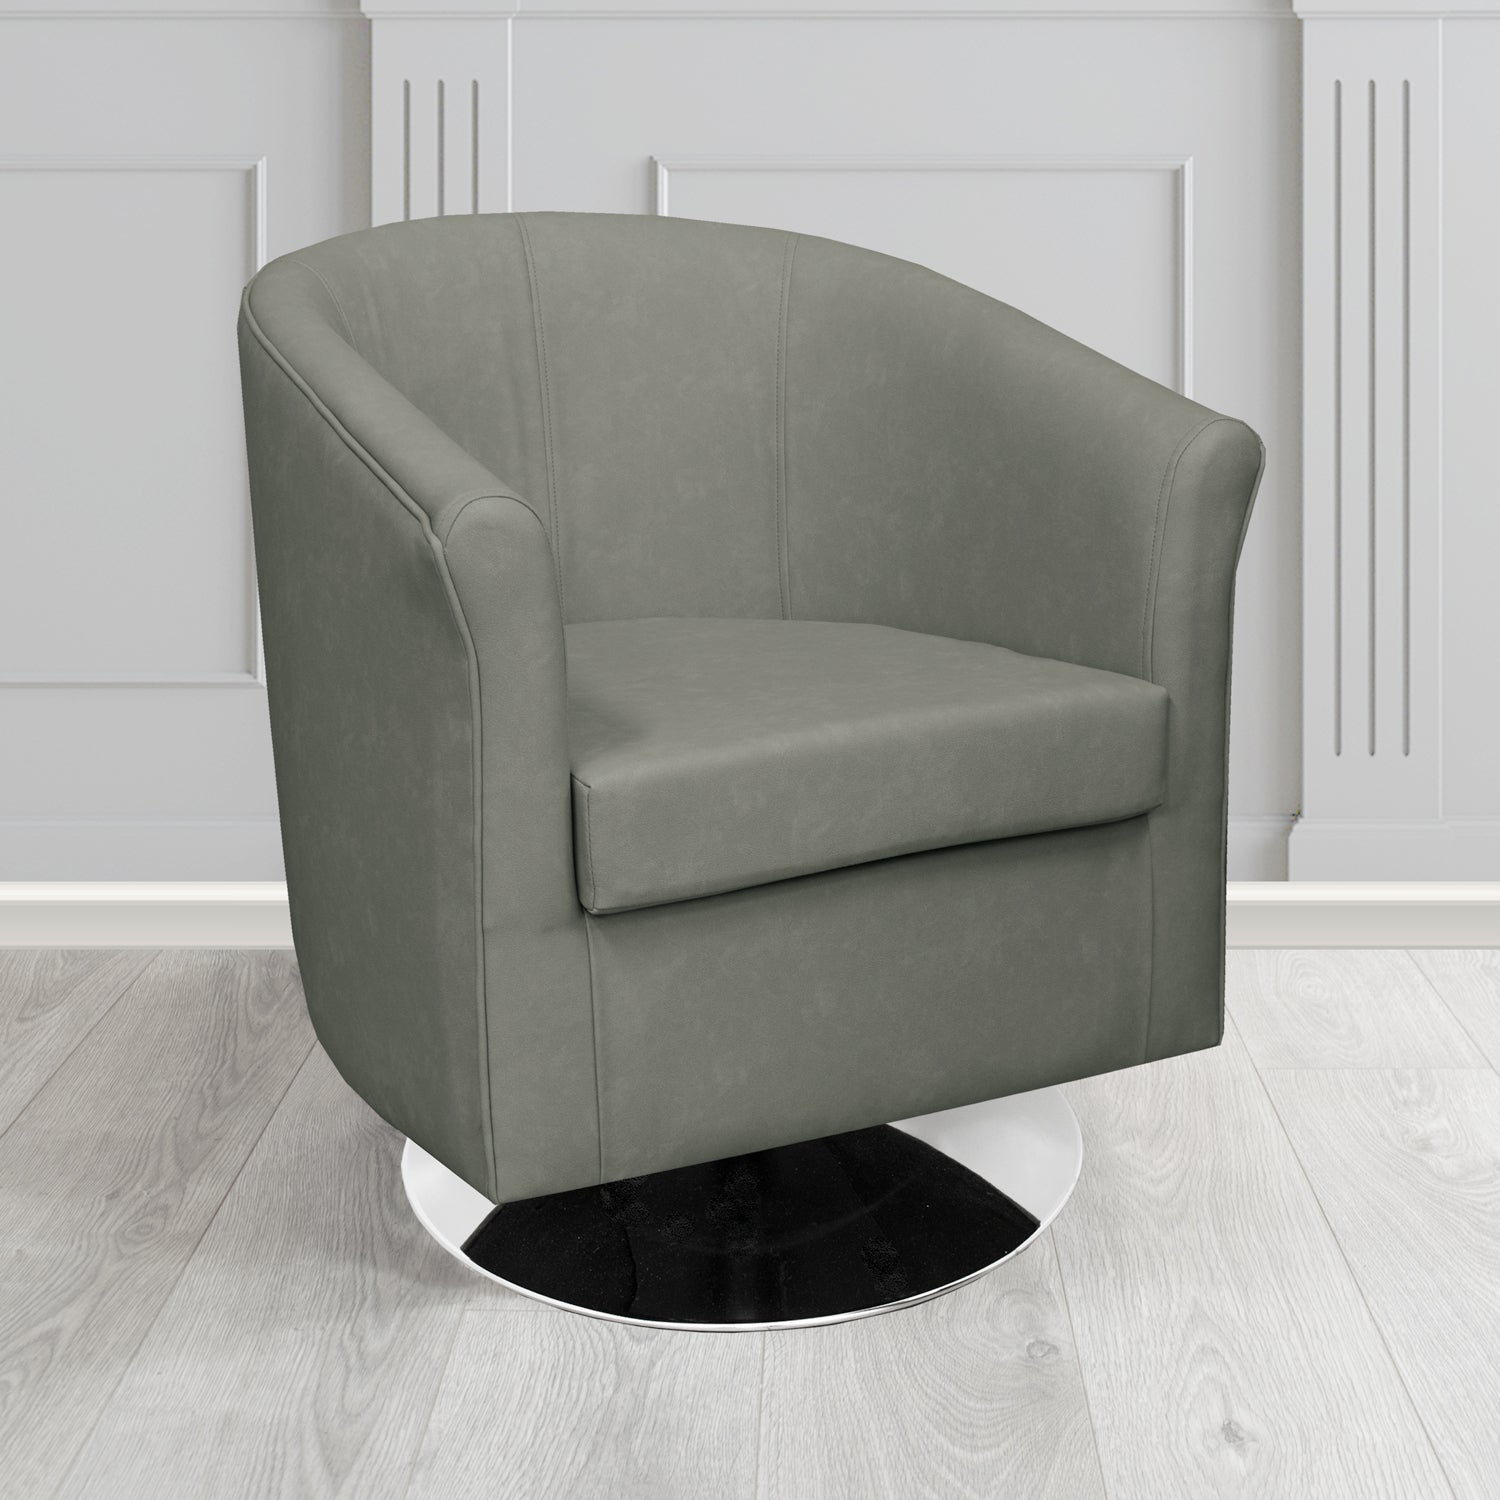 Tuscany Swivel Tub Chair in Infiniti Elephant INF1860 Antimicrobial Crib 5 Faux Leather - The Tub Chair Shop